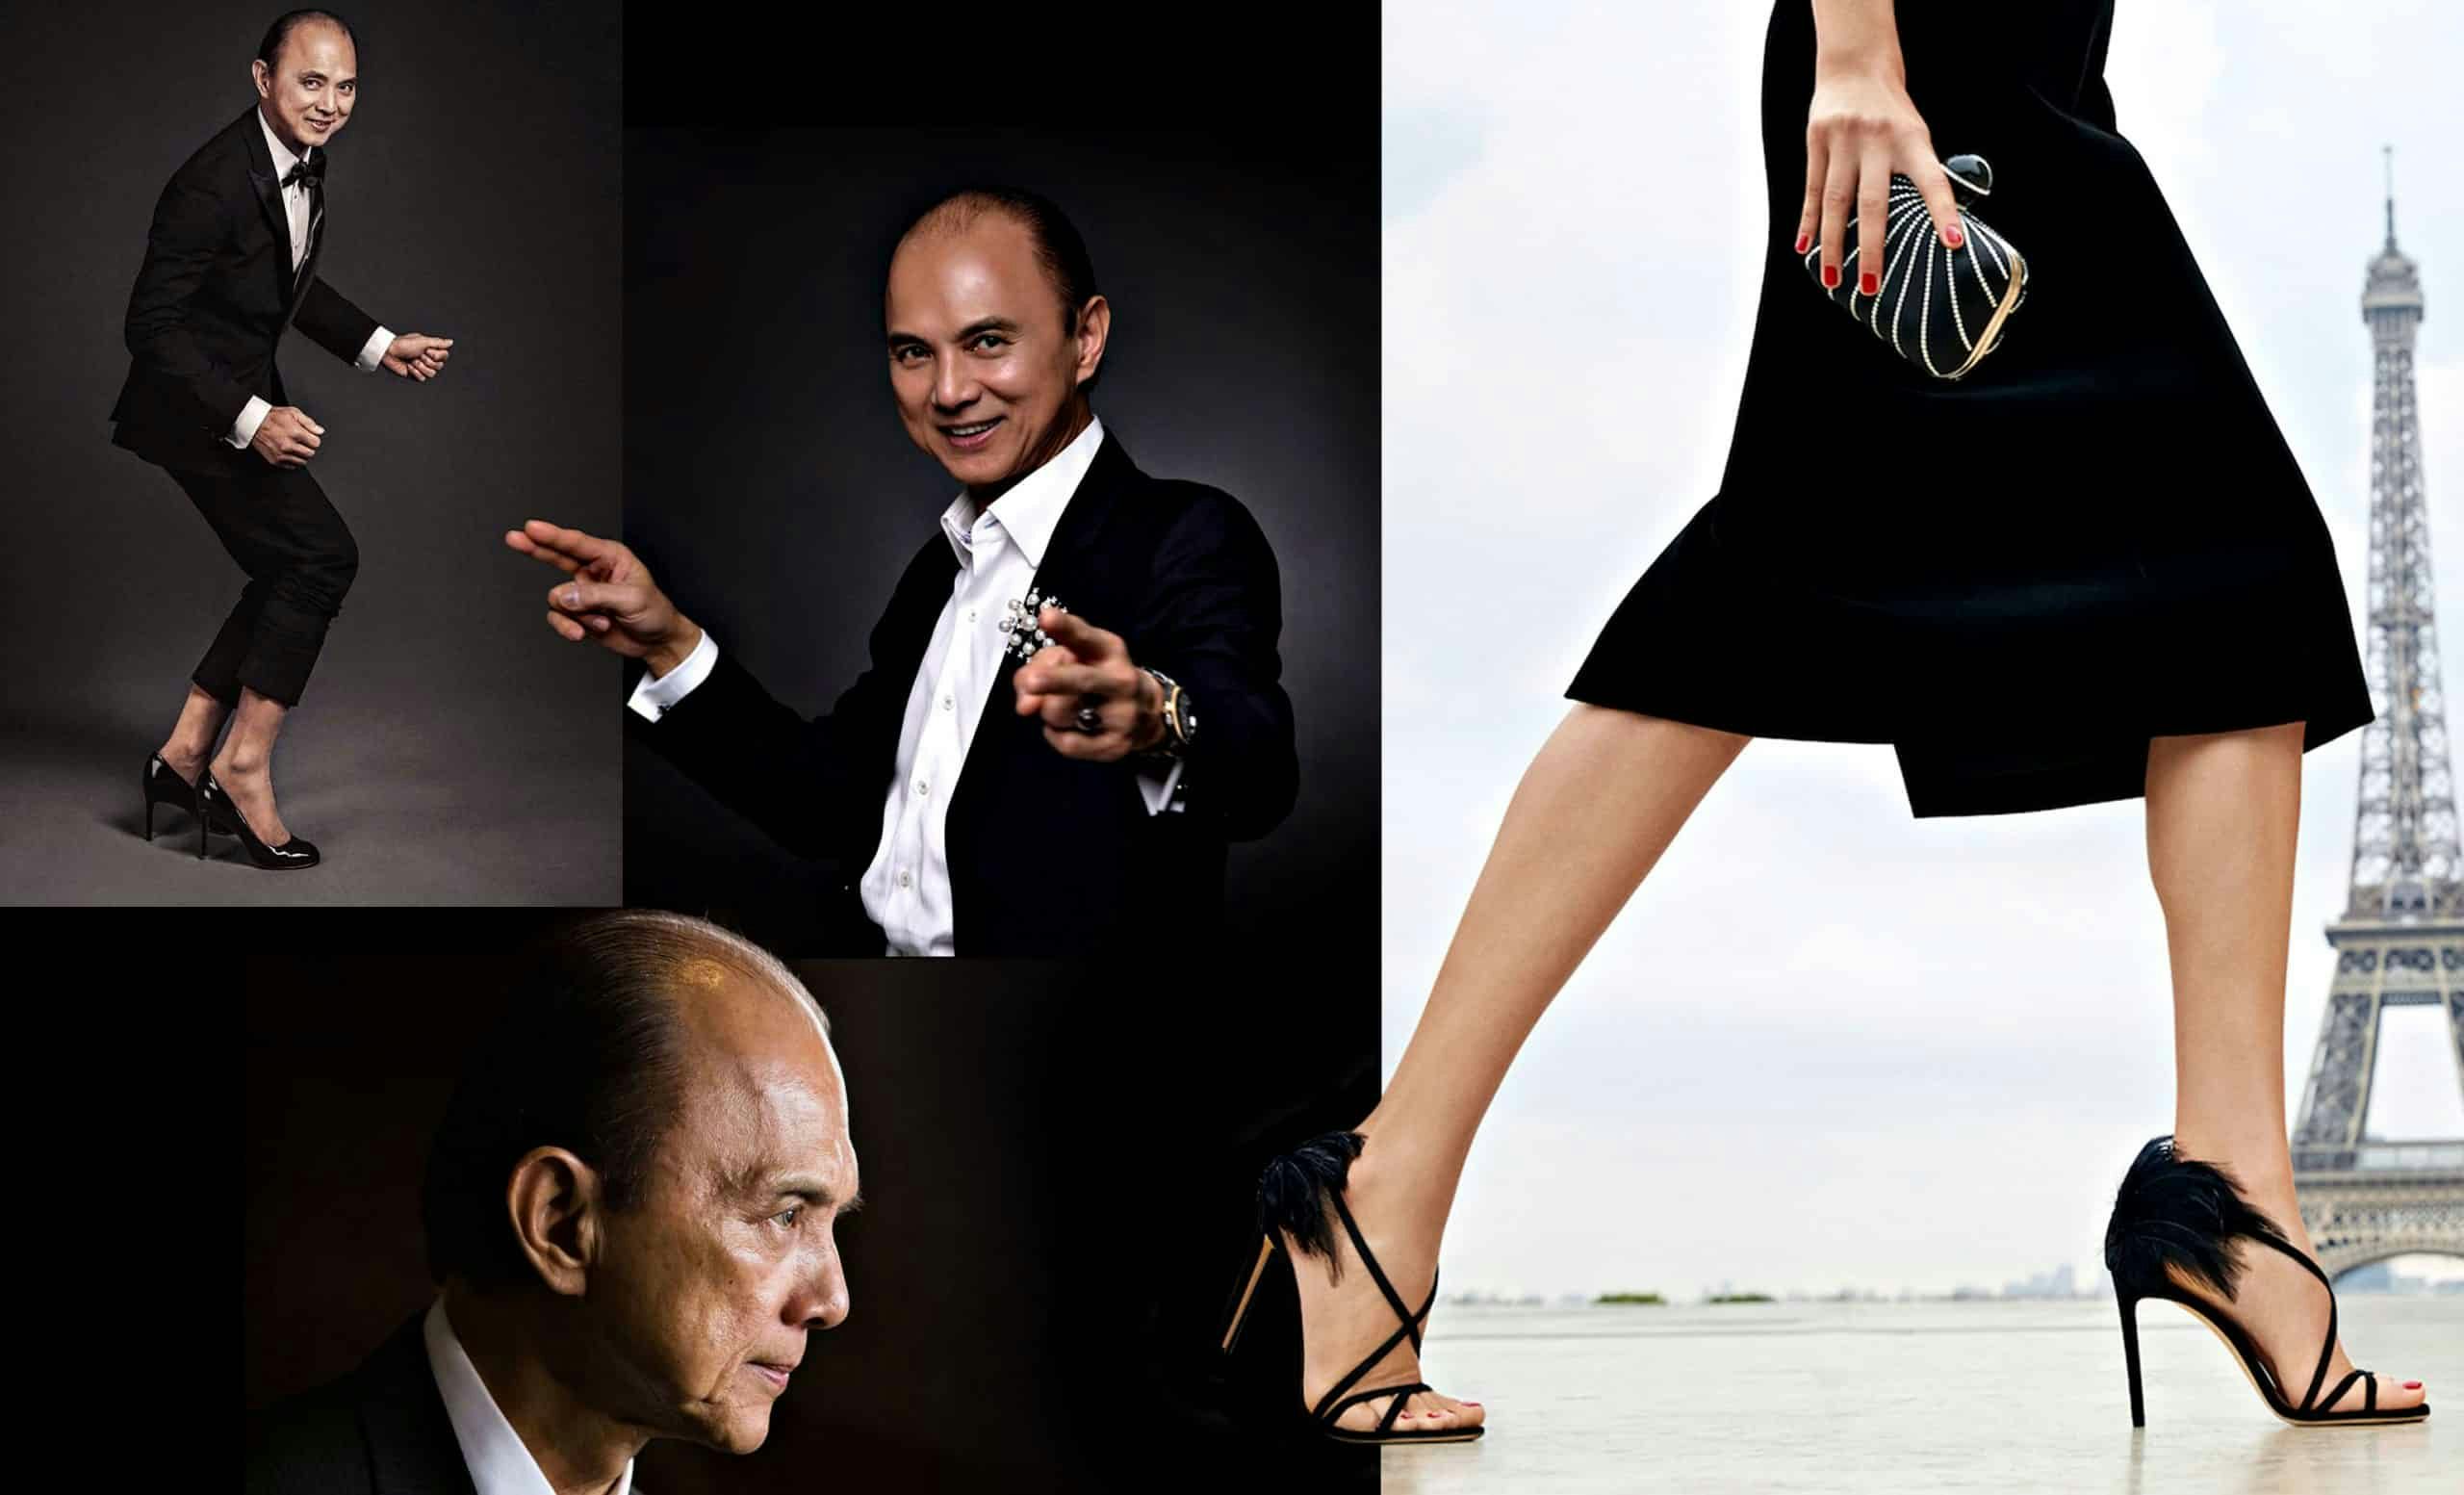 Designer Jimmy Choo shares his work ethic, News - AsiaOne